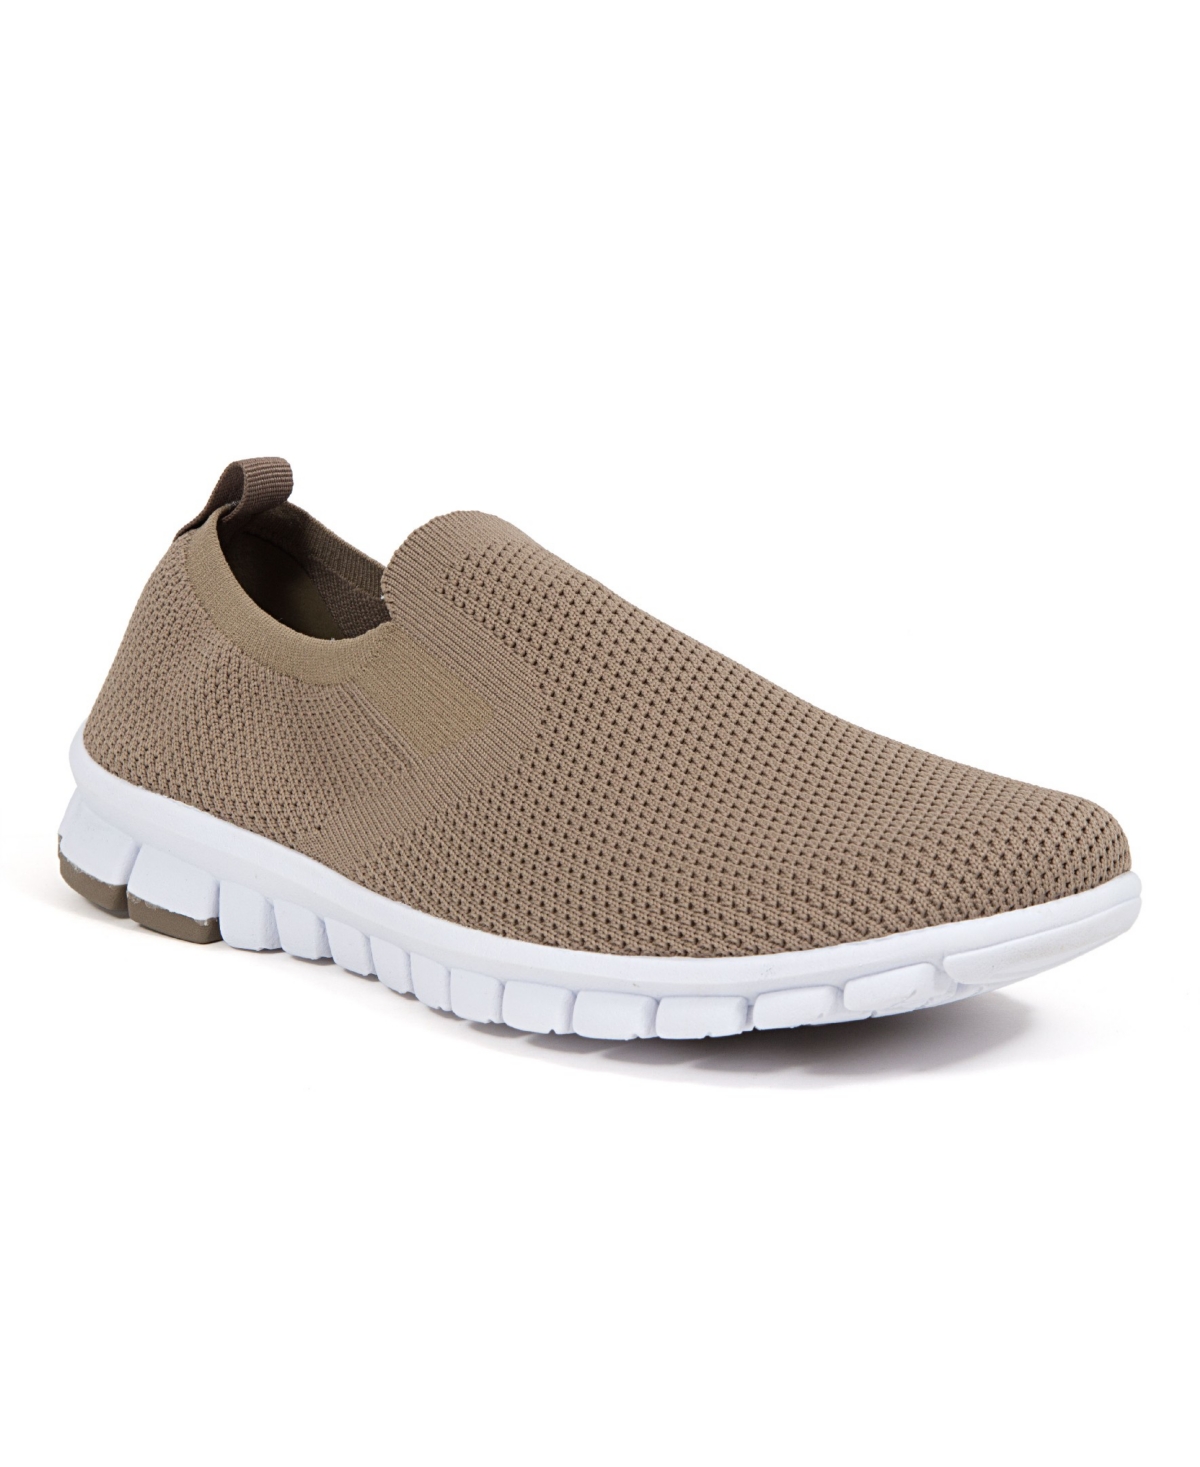 Men's NoSoX Eddy Flexible Sole Bungee Lace Slip-On Oxford Hybrid Casual Sneaker Shoes - Taupe